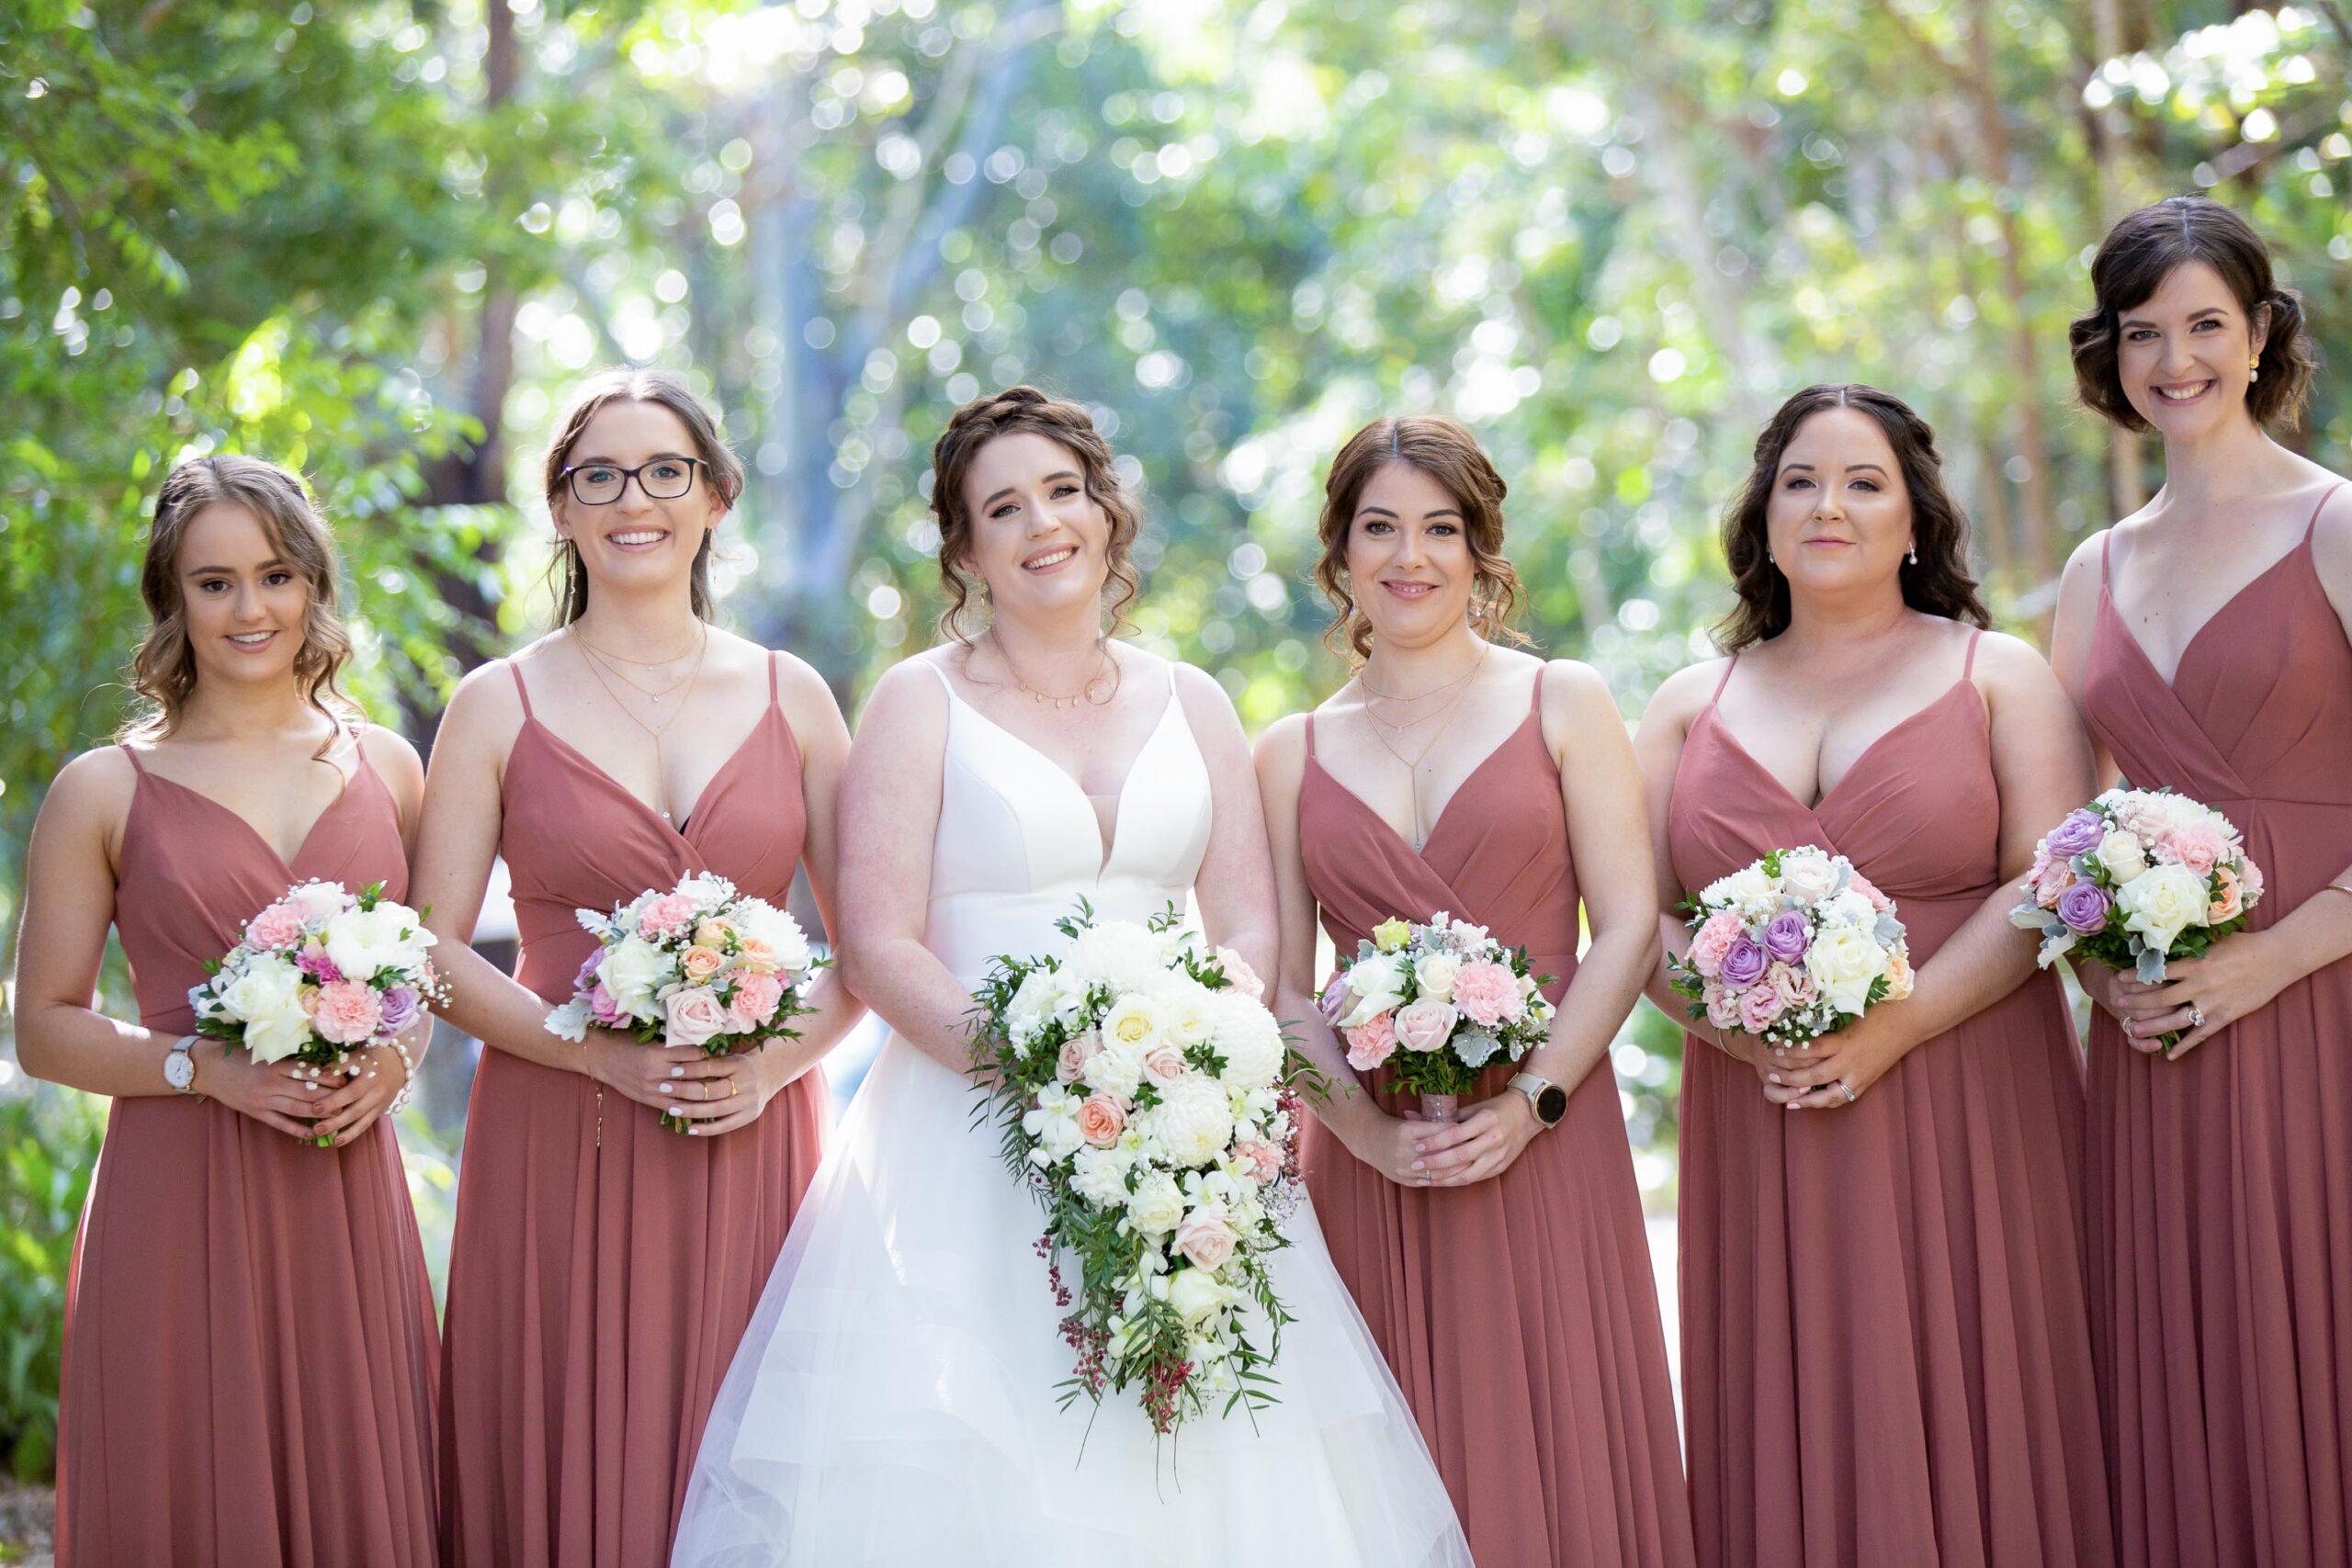 bride and bridesmaids posing for photographer at Brisbane wedding